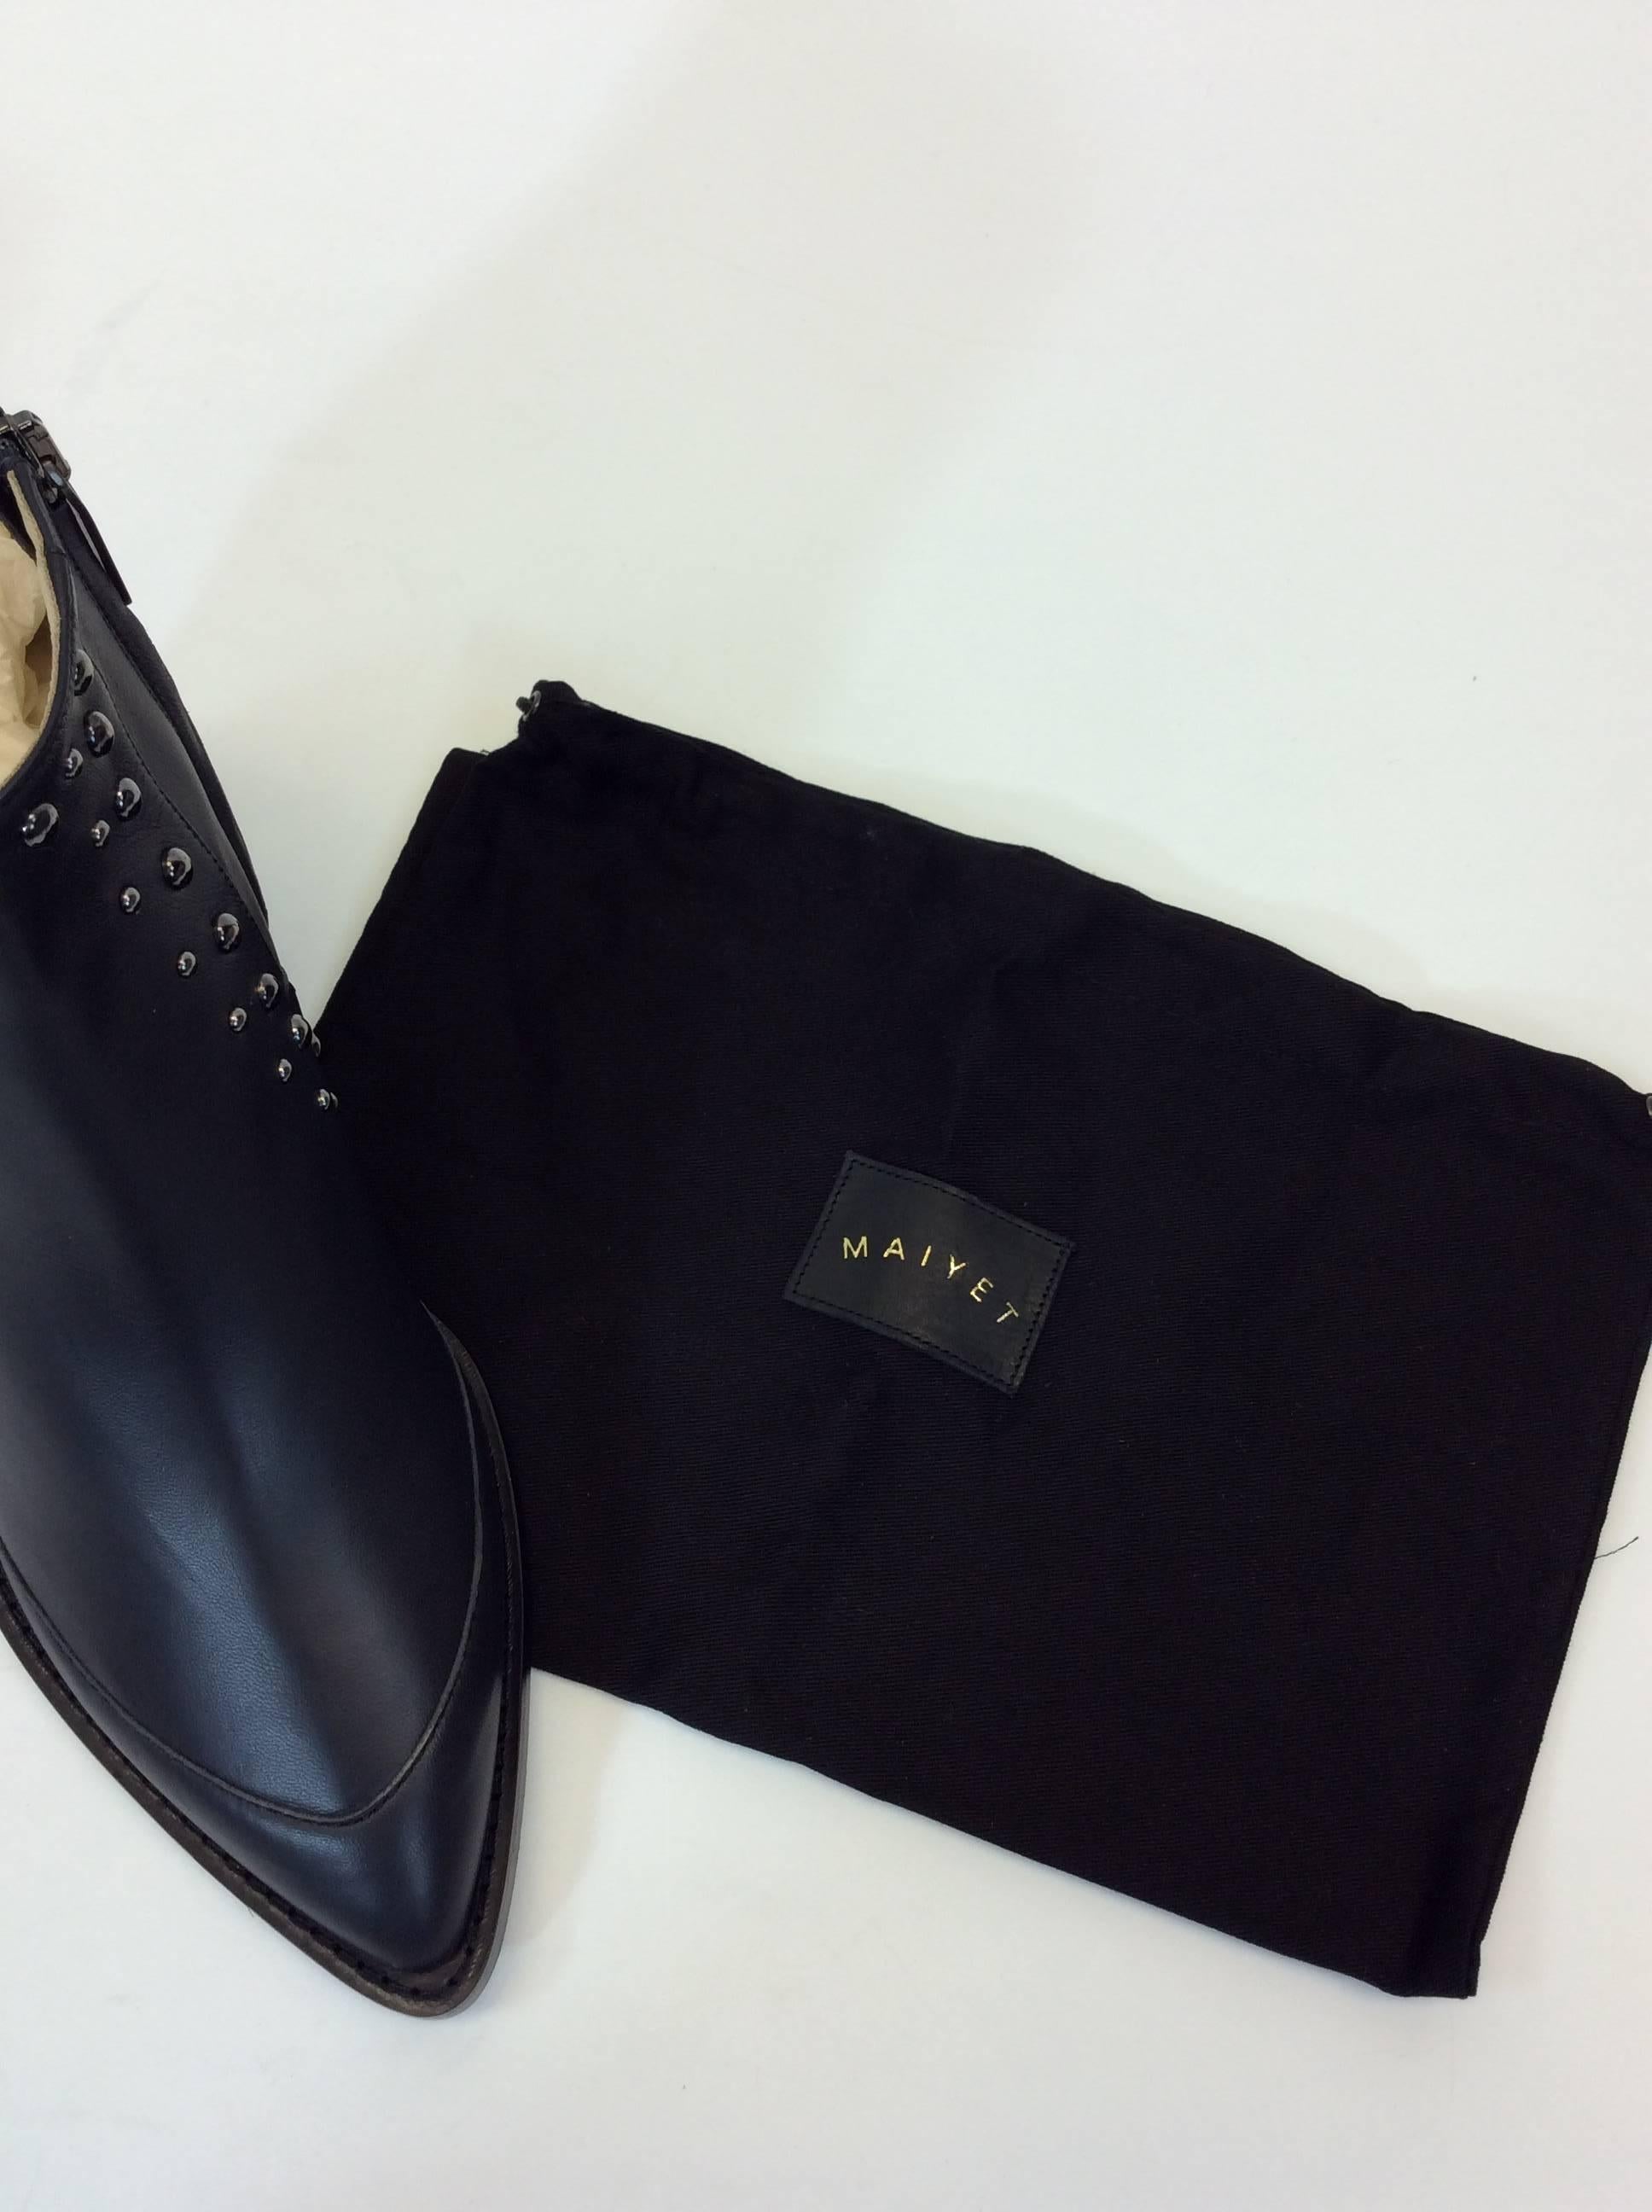 Maiyet Black Studded Leather Ankle Bootie  For Sale 6